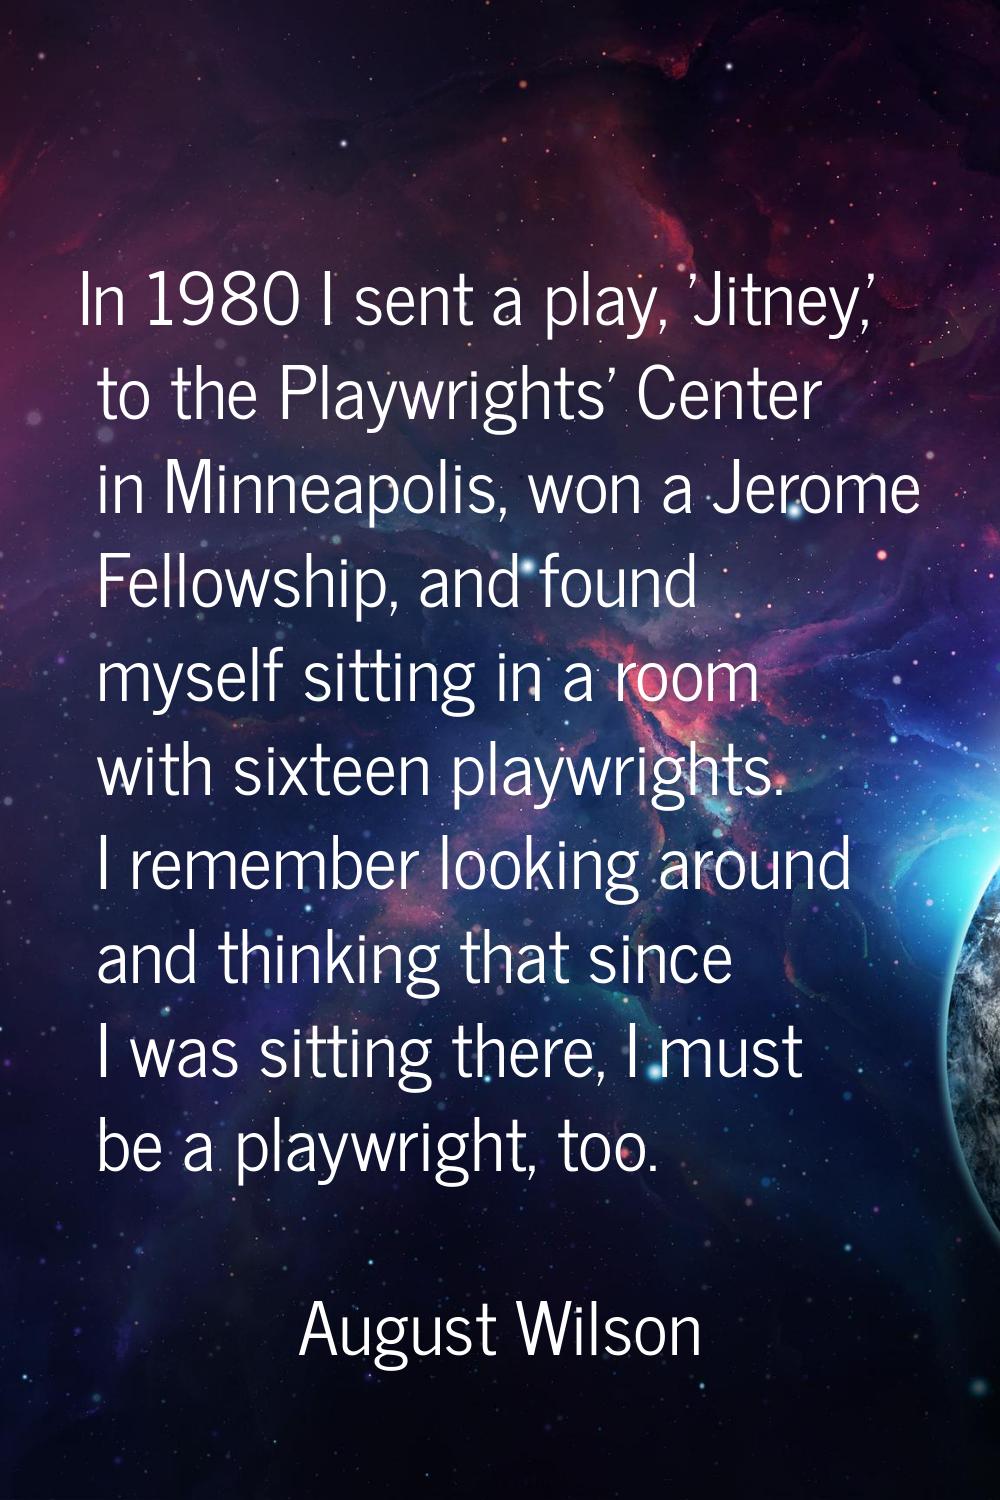 In 1980 I sent a play, 'Jitney,' to the Playwrights' Center in Minneapolis, won a Jerome Fellowship